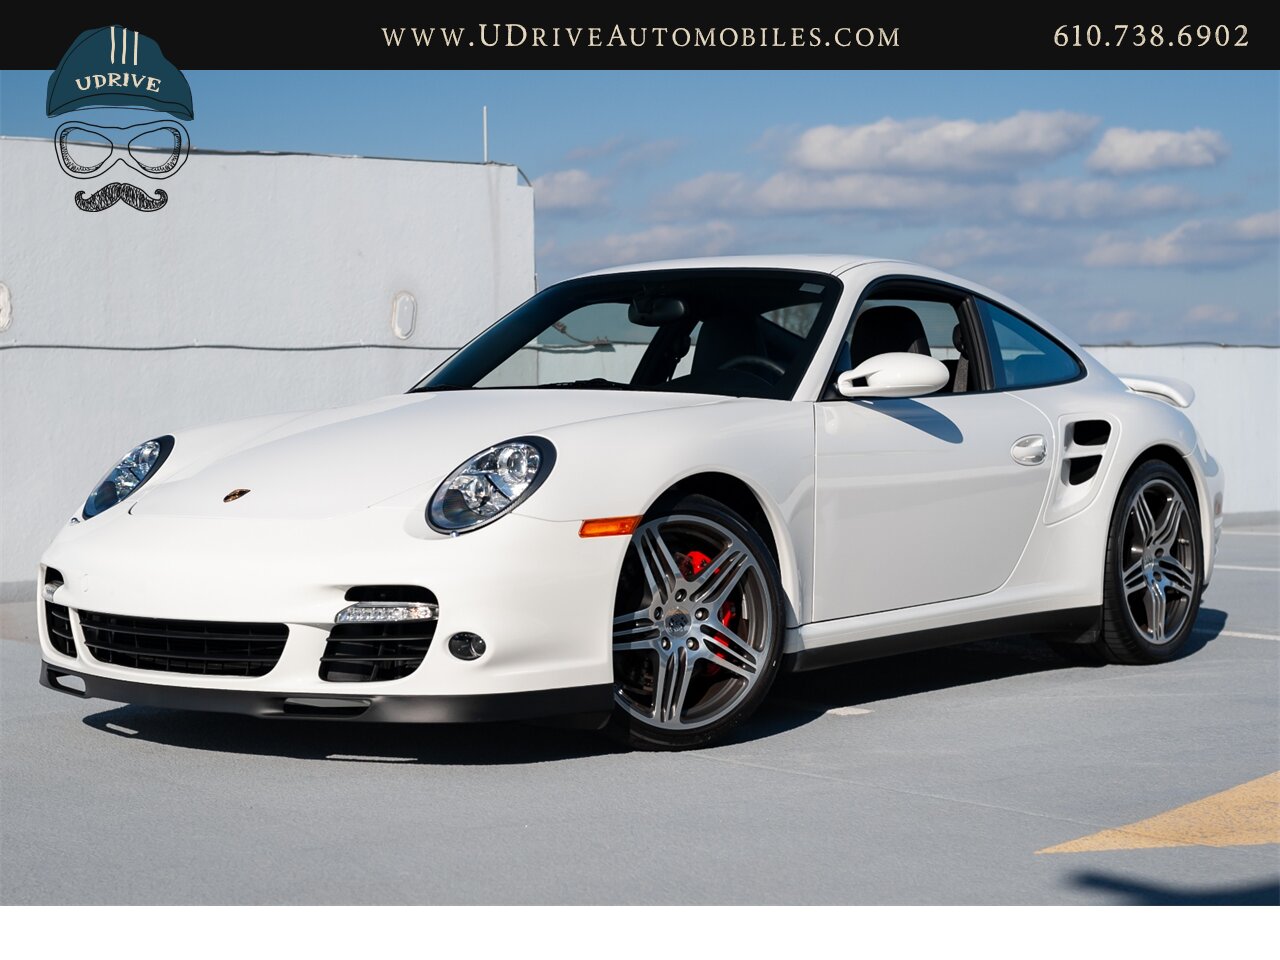 2007 Porsche 911 Turbo 642 Miles 1 Owner Carrara White 997  Sport Chrono Adaptive Sport Seats All Documentation from New - Photo 1 - West Chester, PA 19382